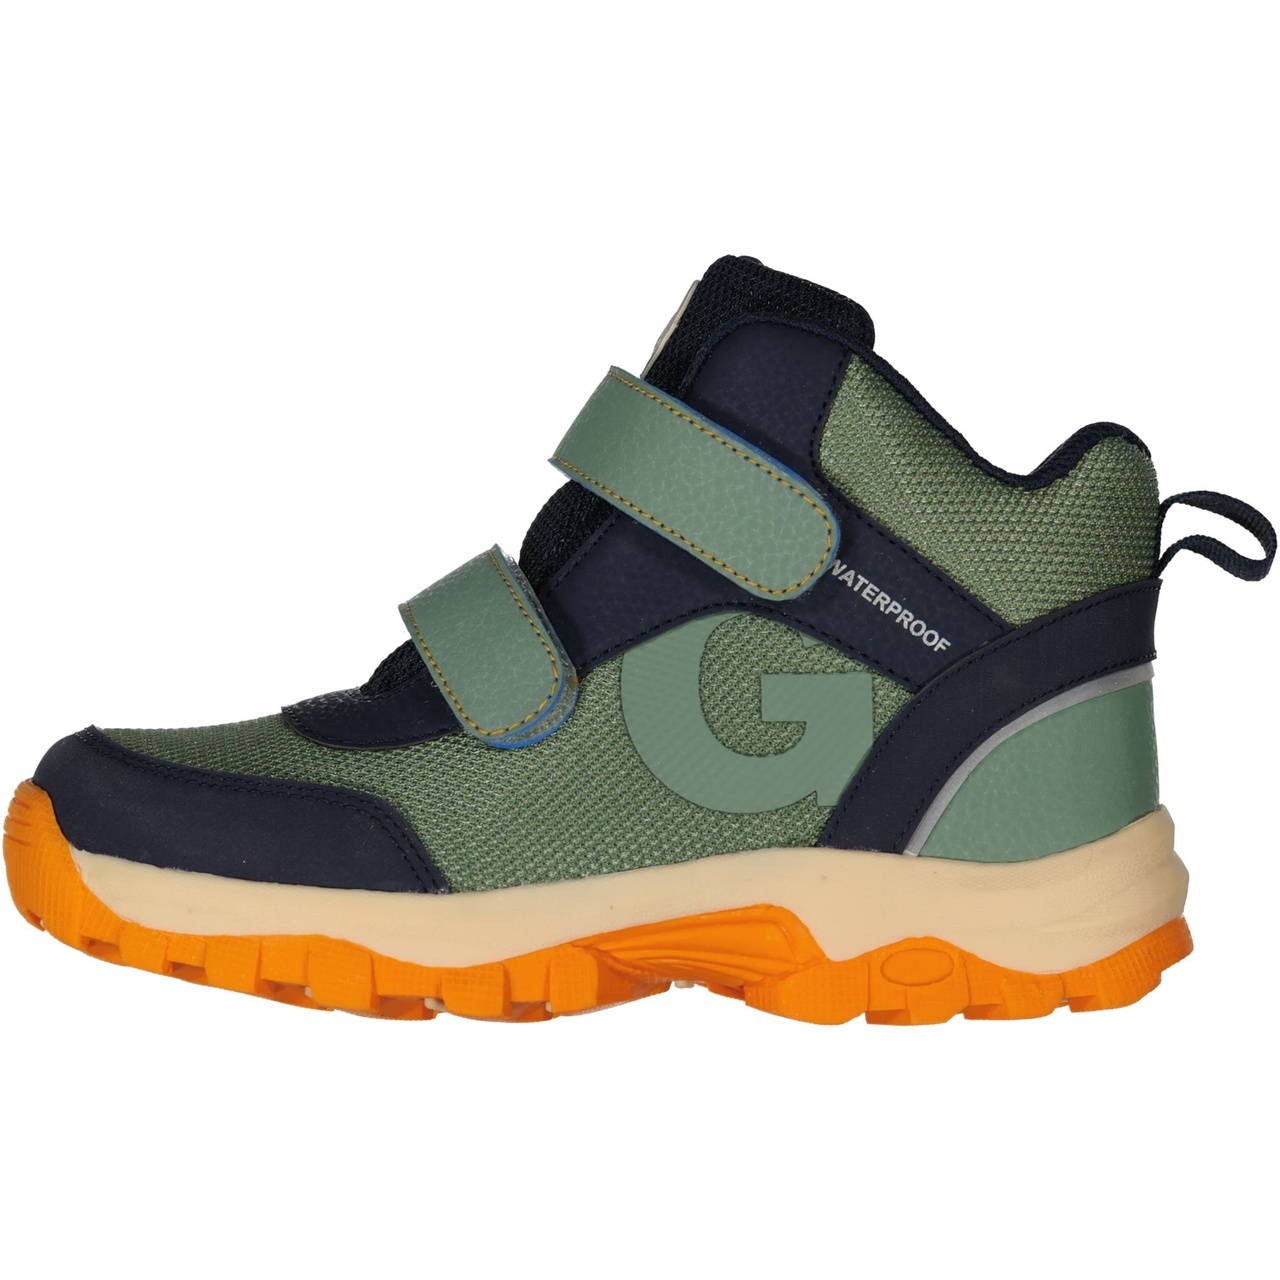 All weather shoes Moss green  36 (23,7 cm)